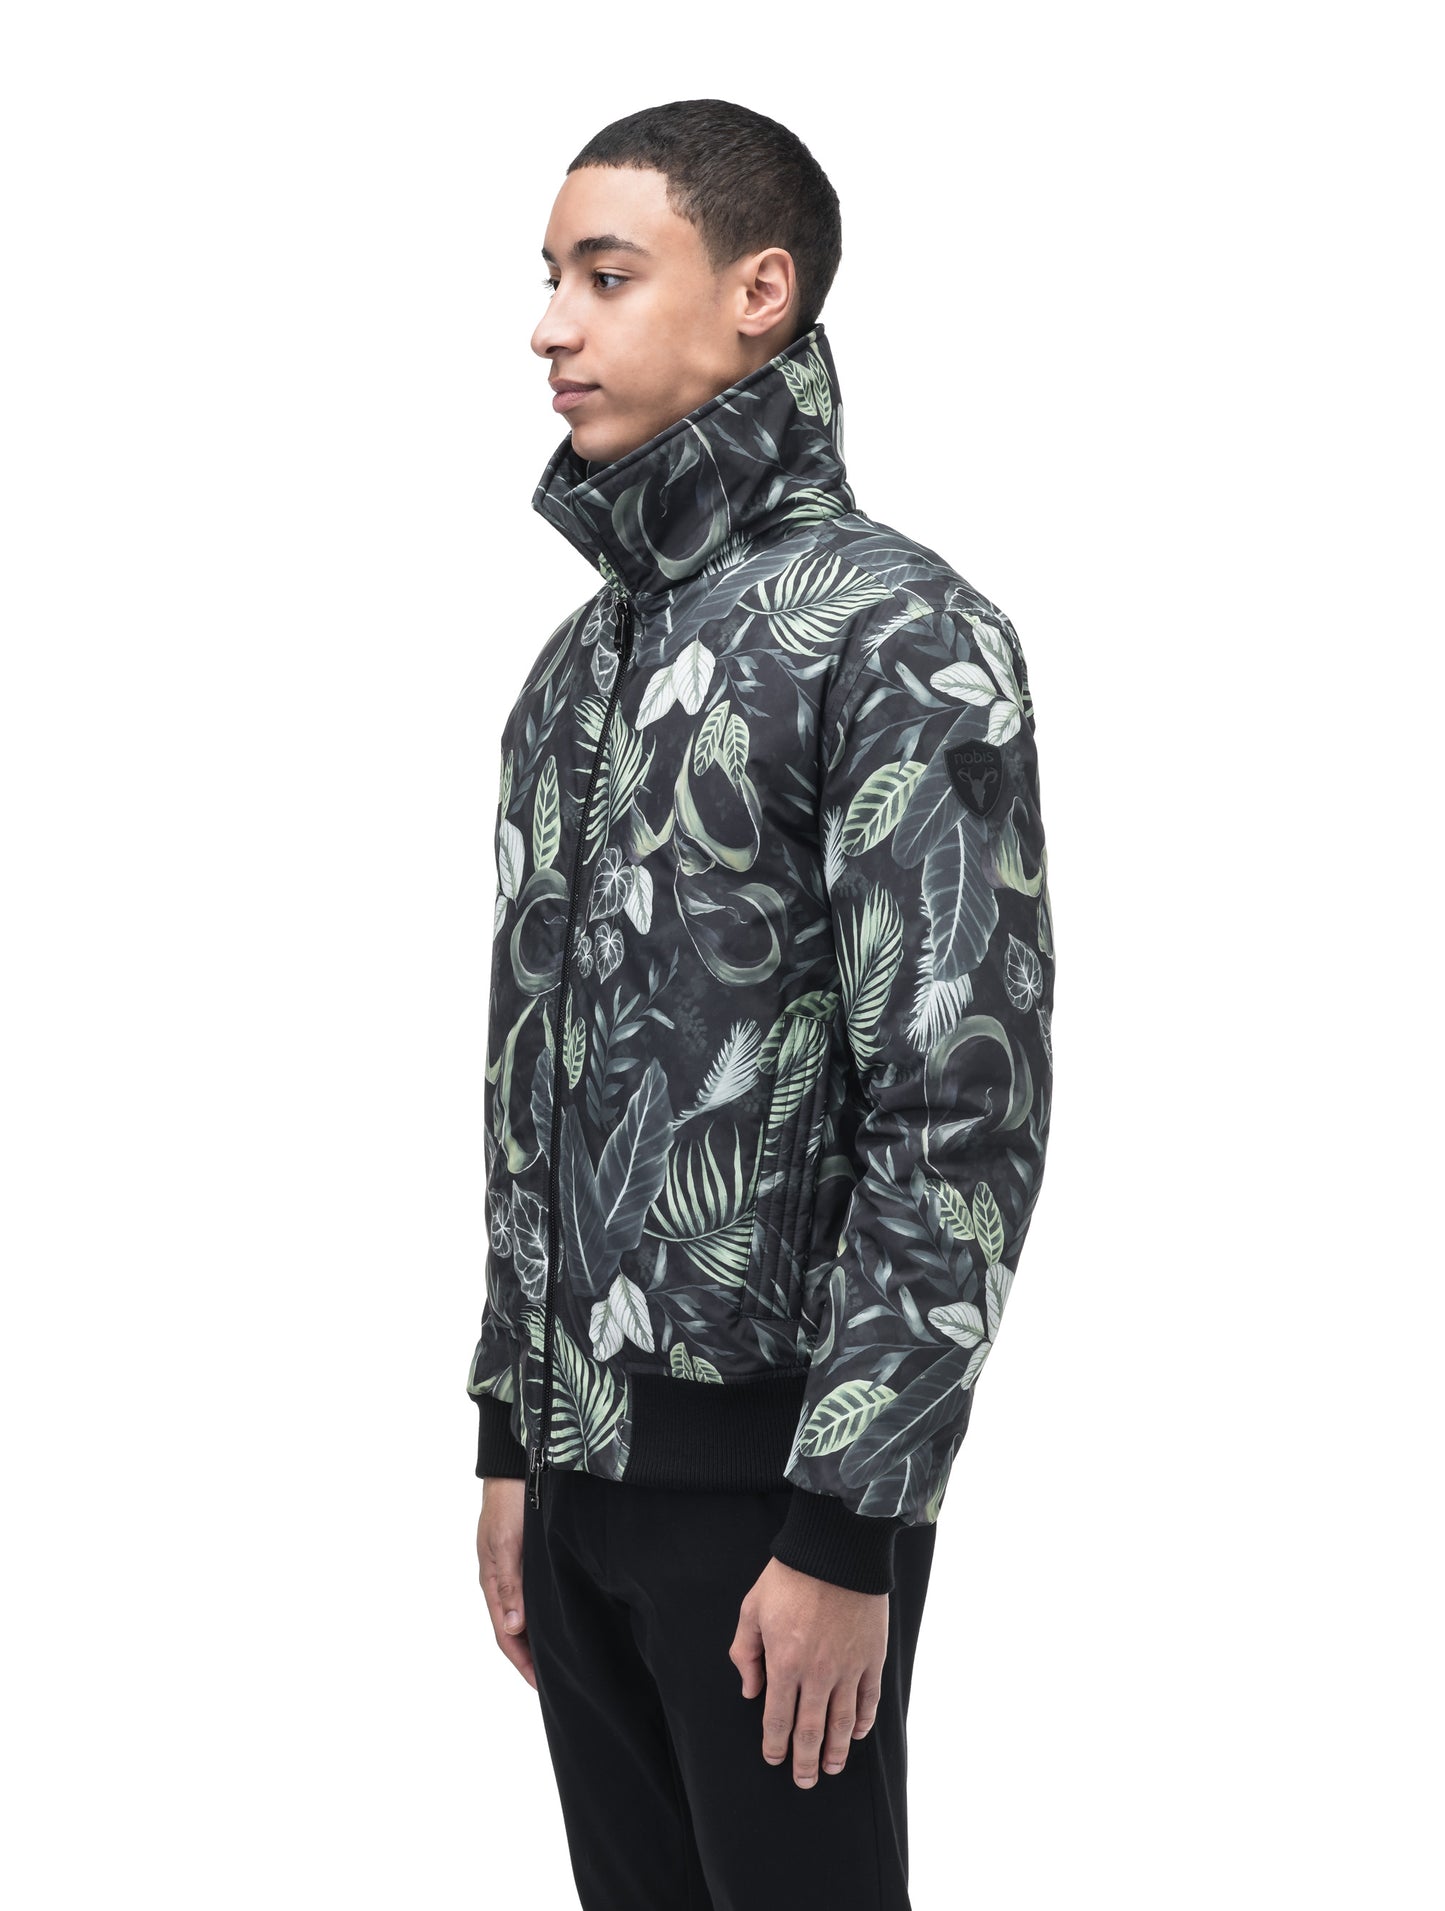 Sonar Men's Aviator Jacket in hip length, Canadian duck down insulation, removable shearling collar with hidden tuckable hood, and two-way front zipper, in Foliage